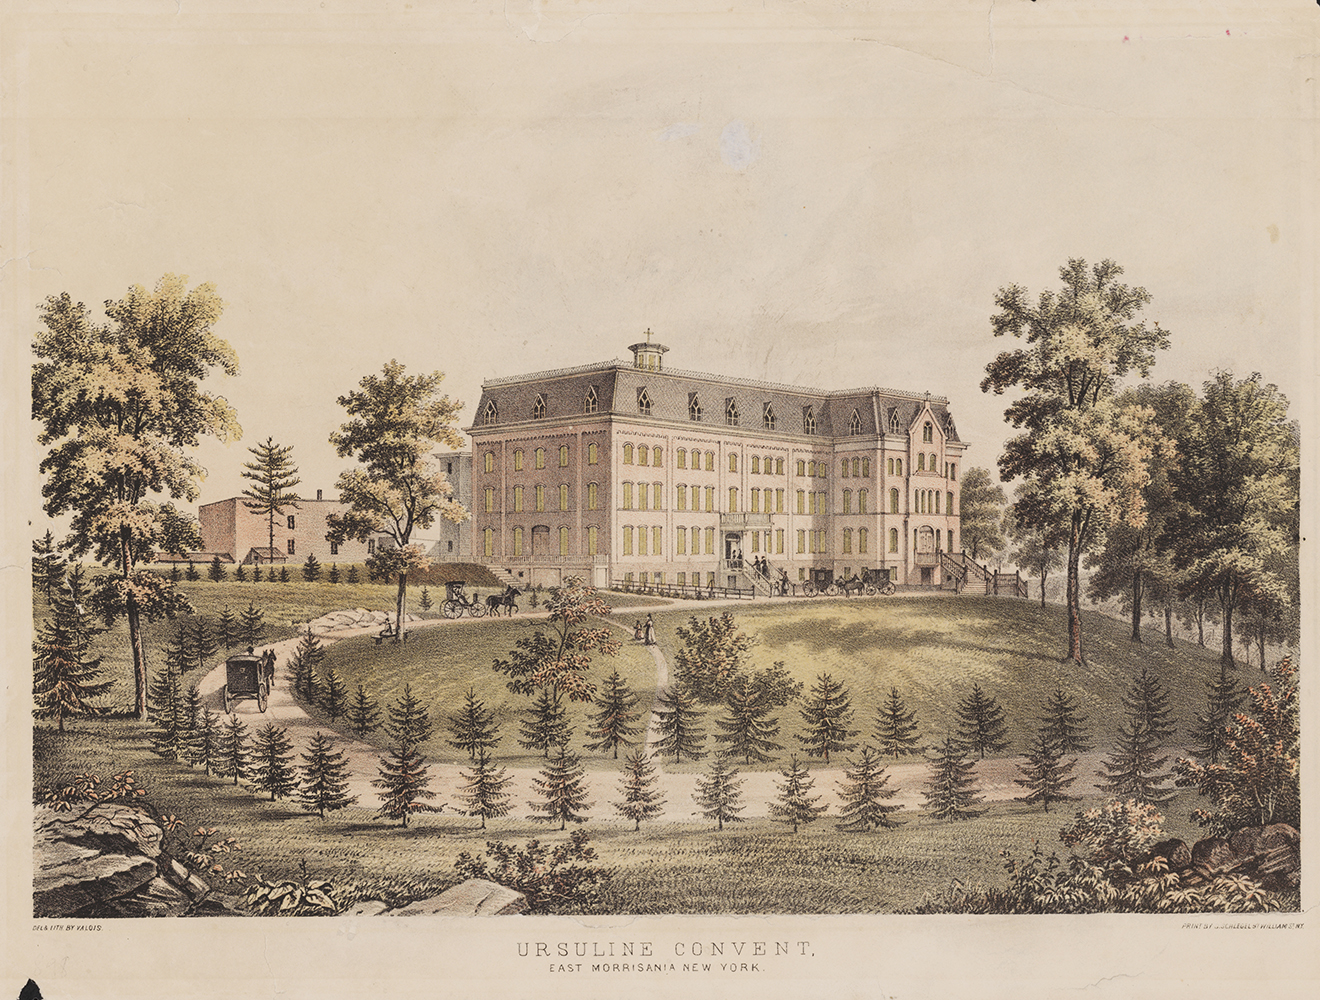 Ursuline Convent, by the same artist as View of Melrose. 